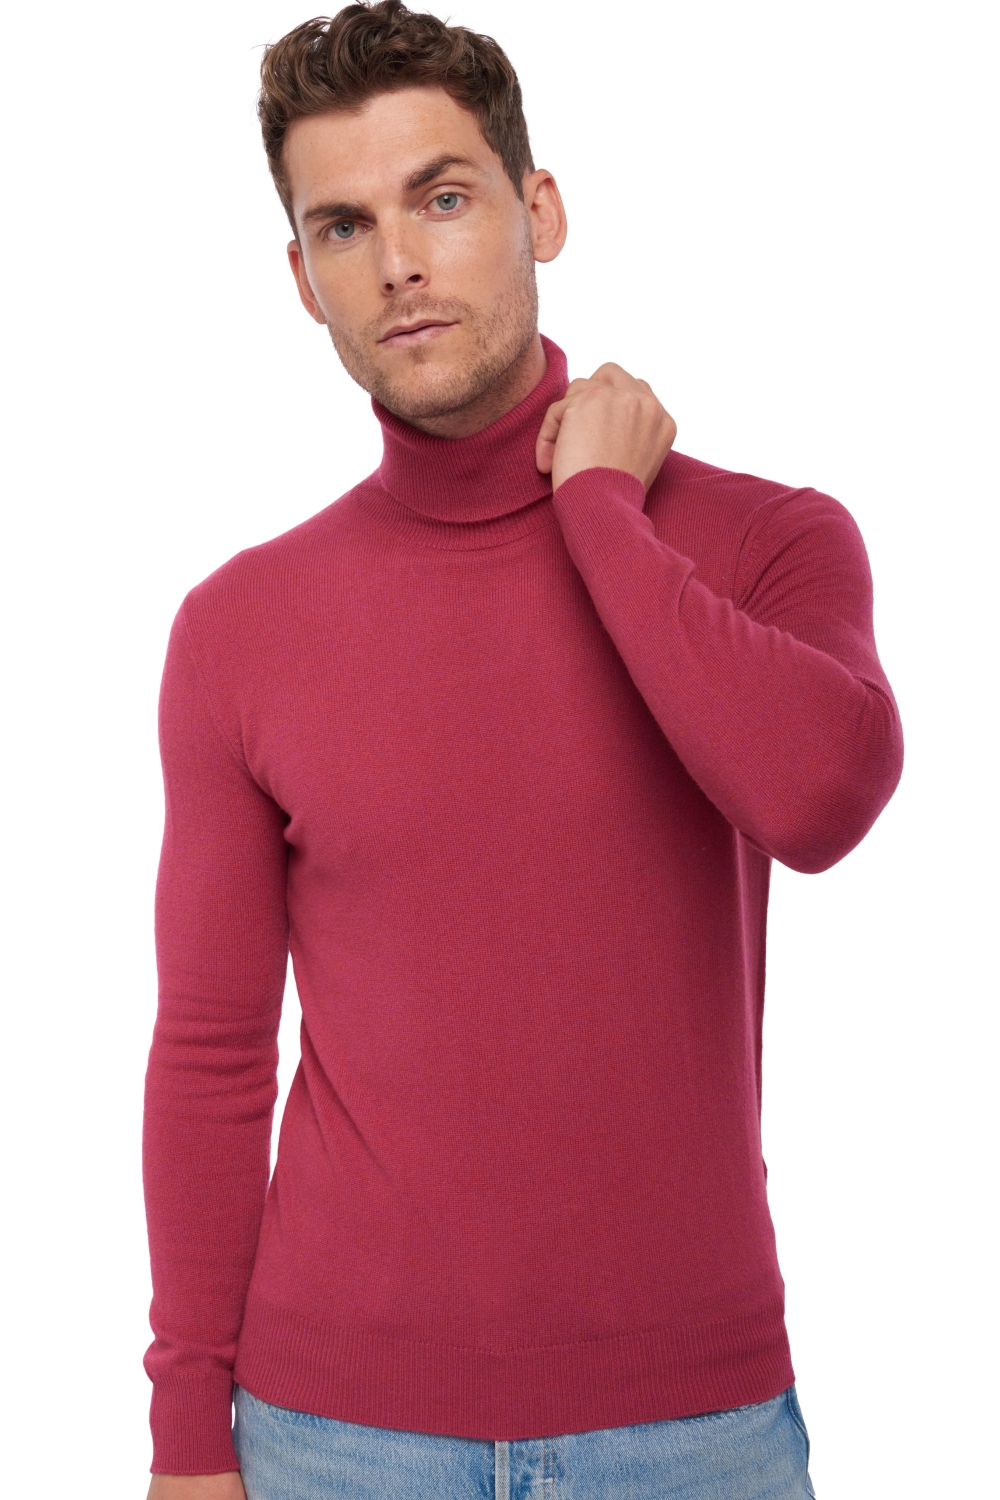 Cashmere men basic sweaters at low prices tarry first highland m